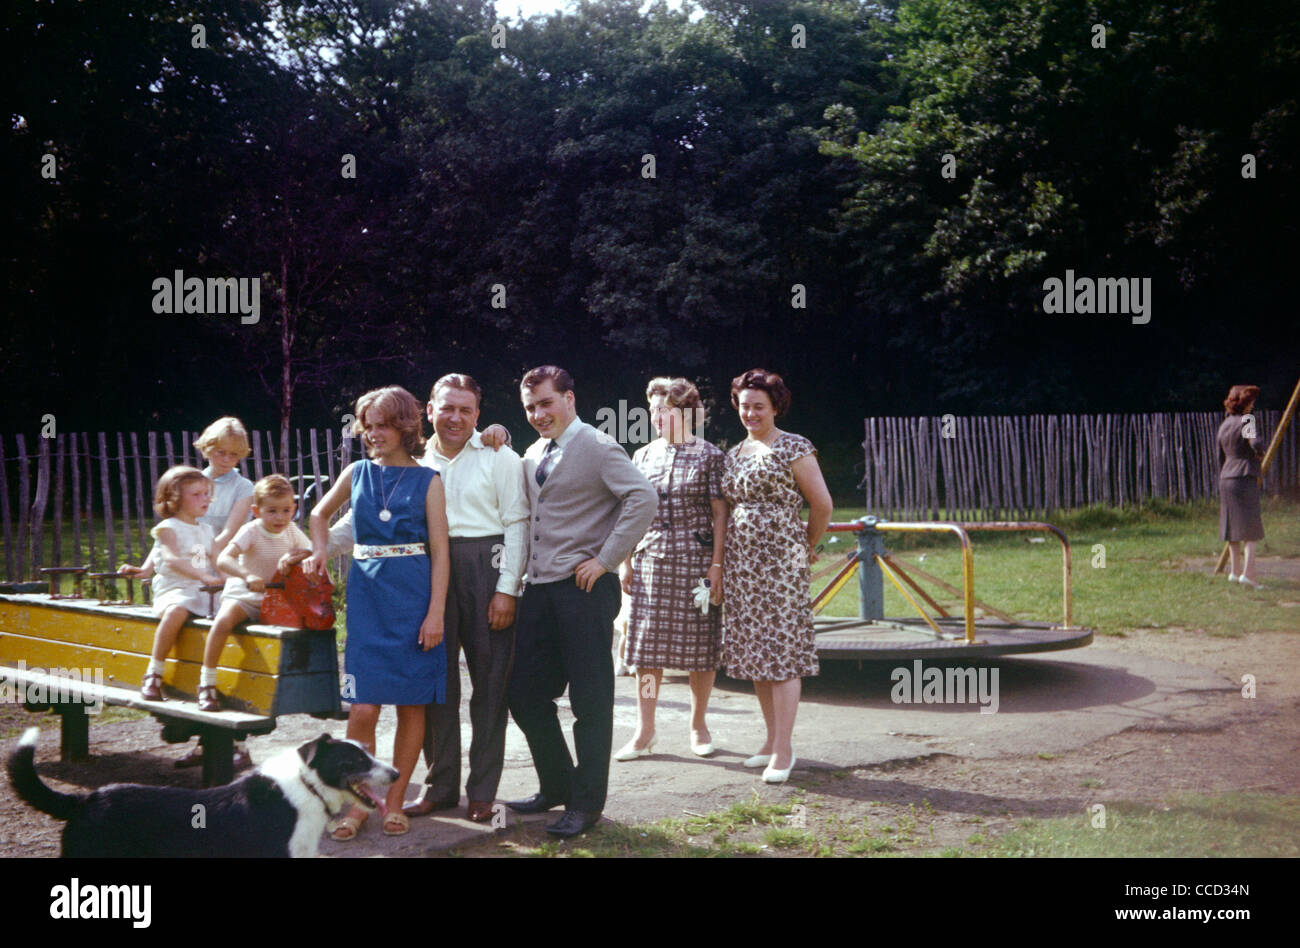 Families and friends have their photo taken in a childrens' playground in the early nineteen sixties. Stock Photo